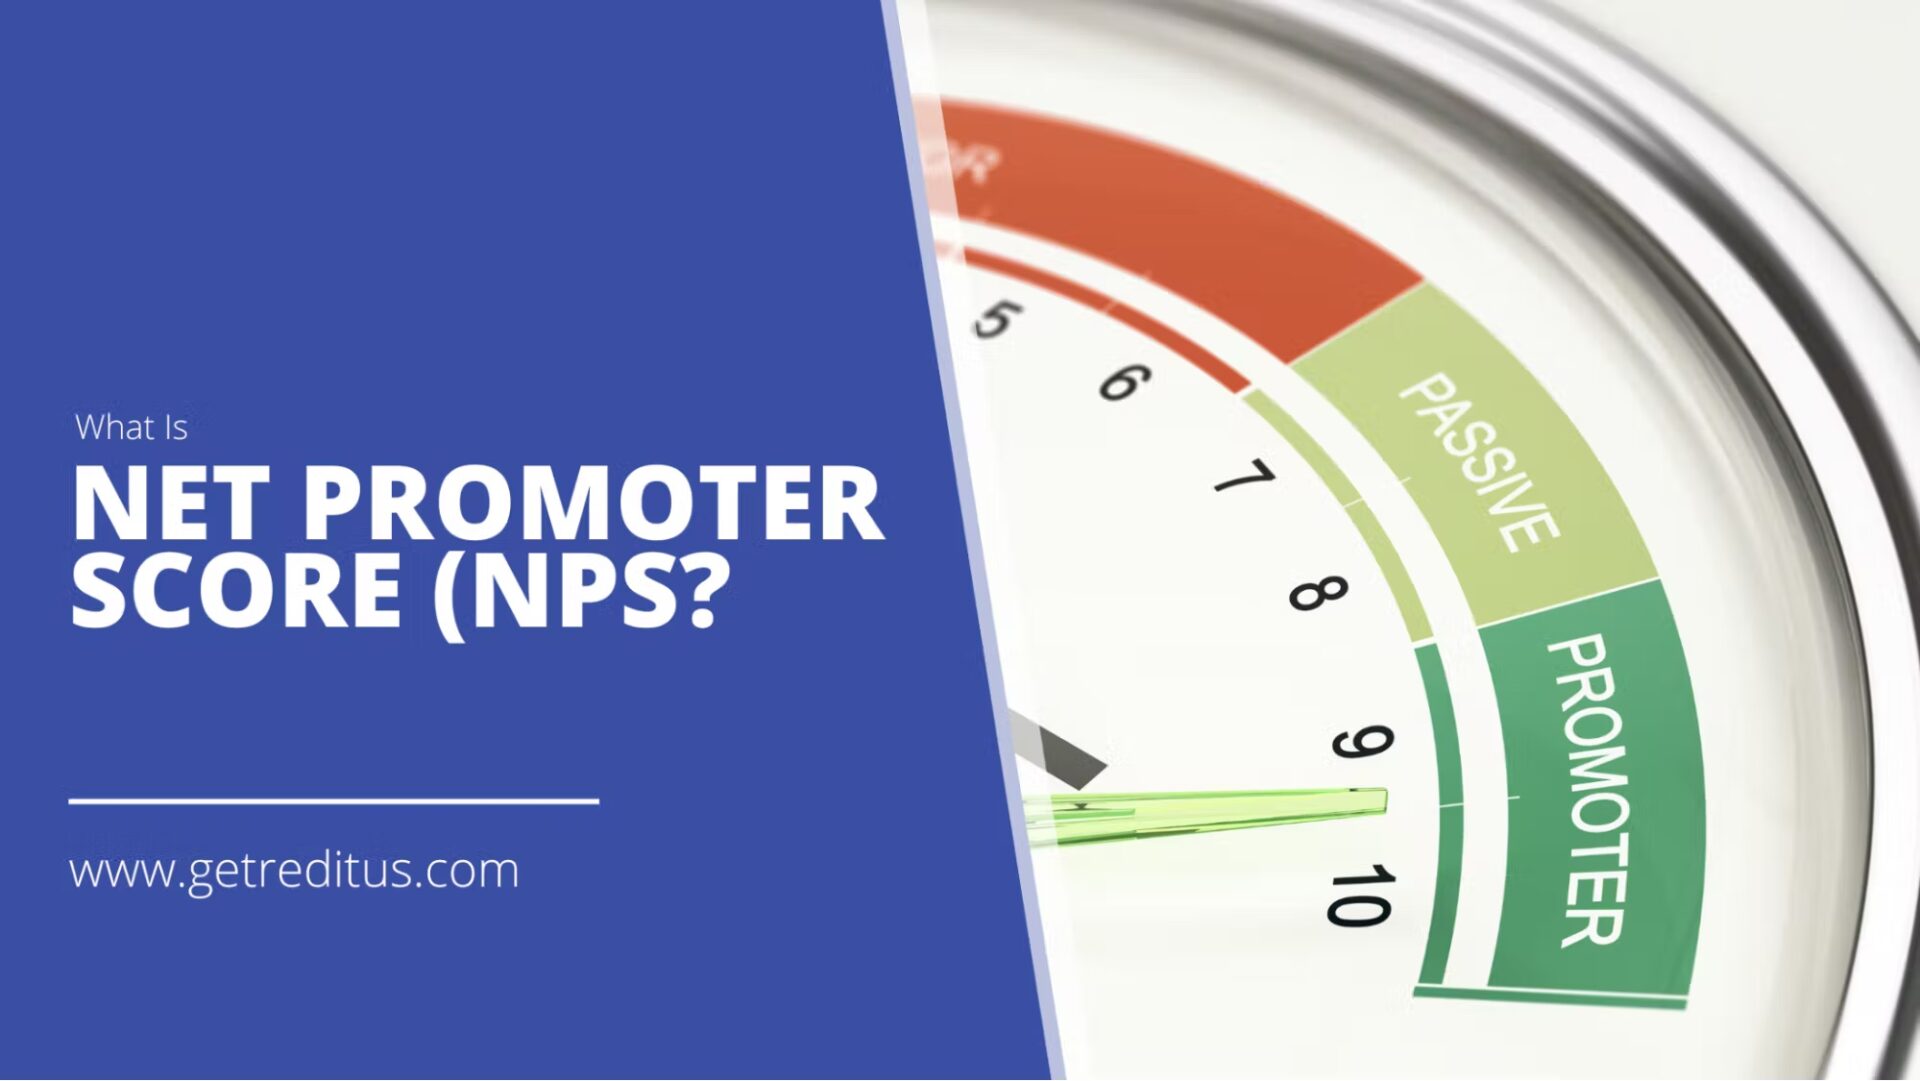 What Is NPS (Net Promoter Score)? Everything you need to know.